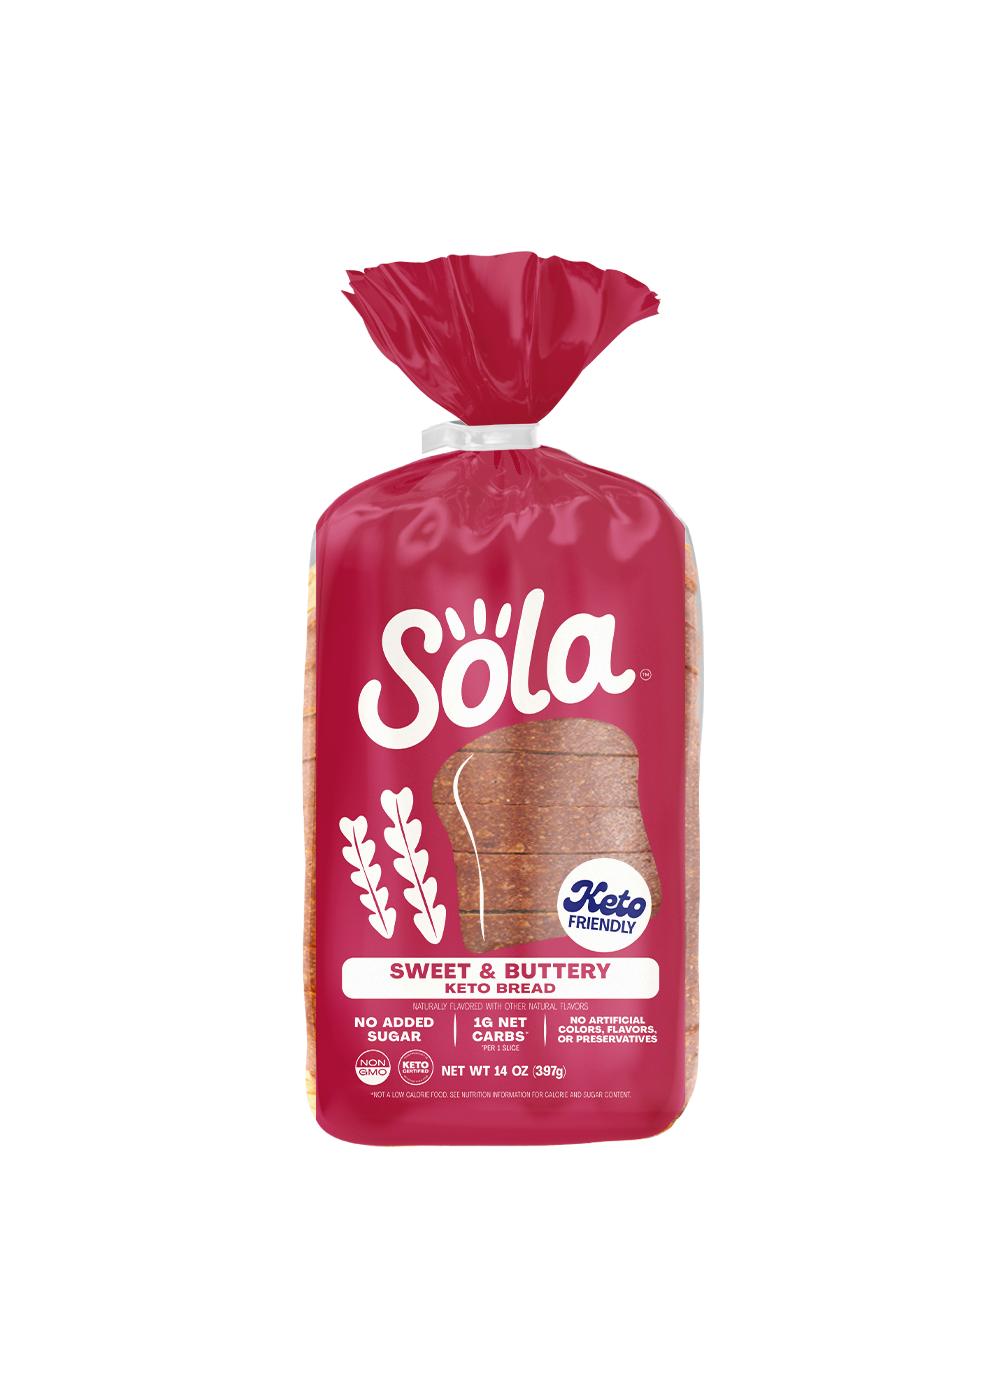 Sola Sweet & Buttery Bread; image 1 of 3